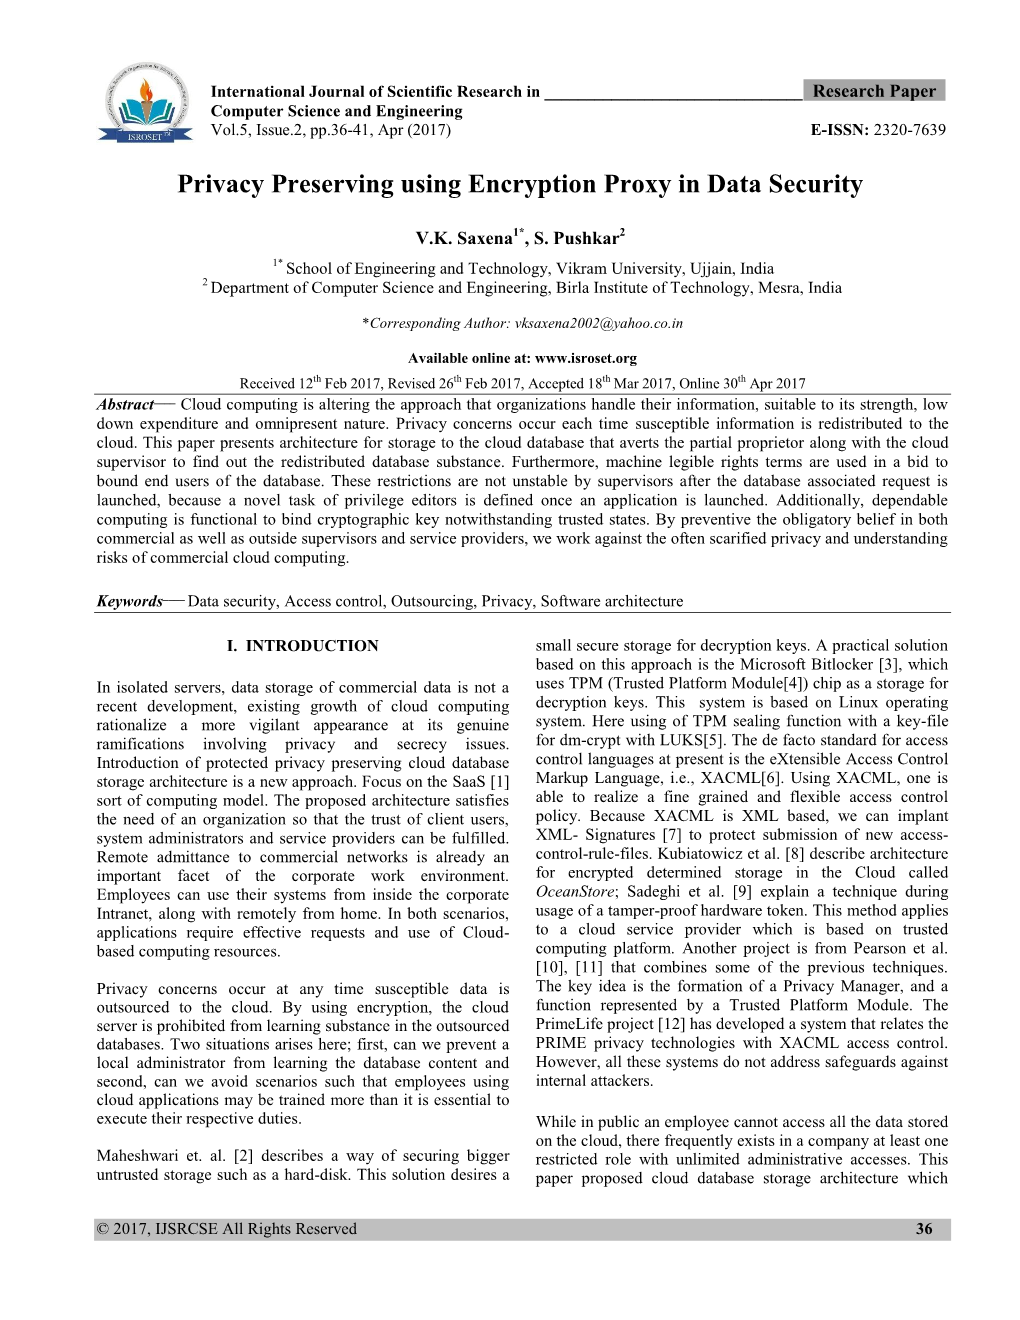 Privacy Preserving Using Encryption Proxy in Data Security